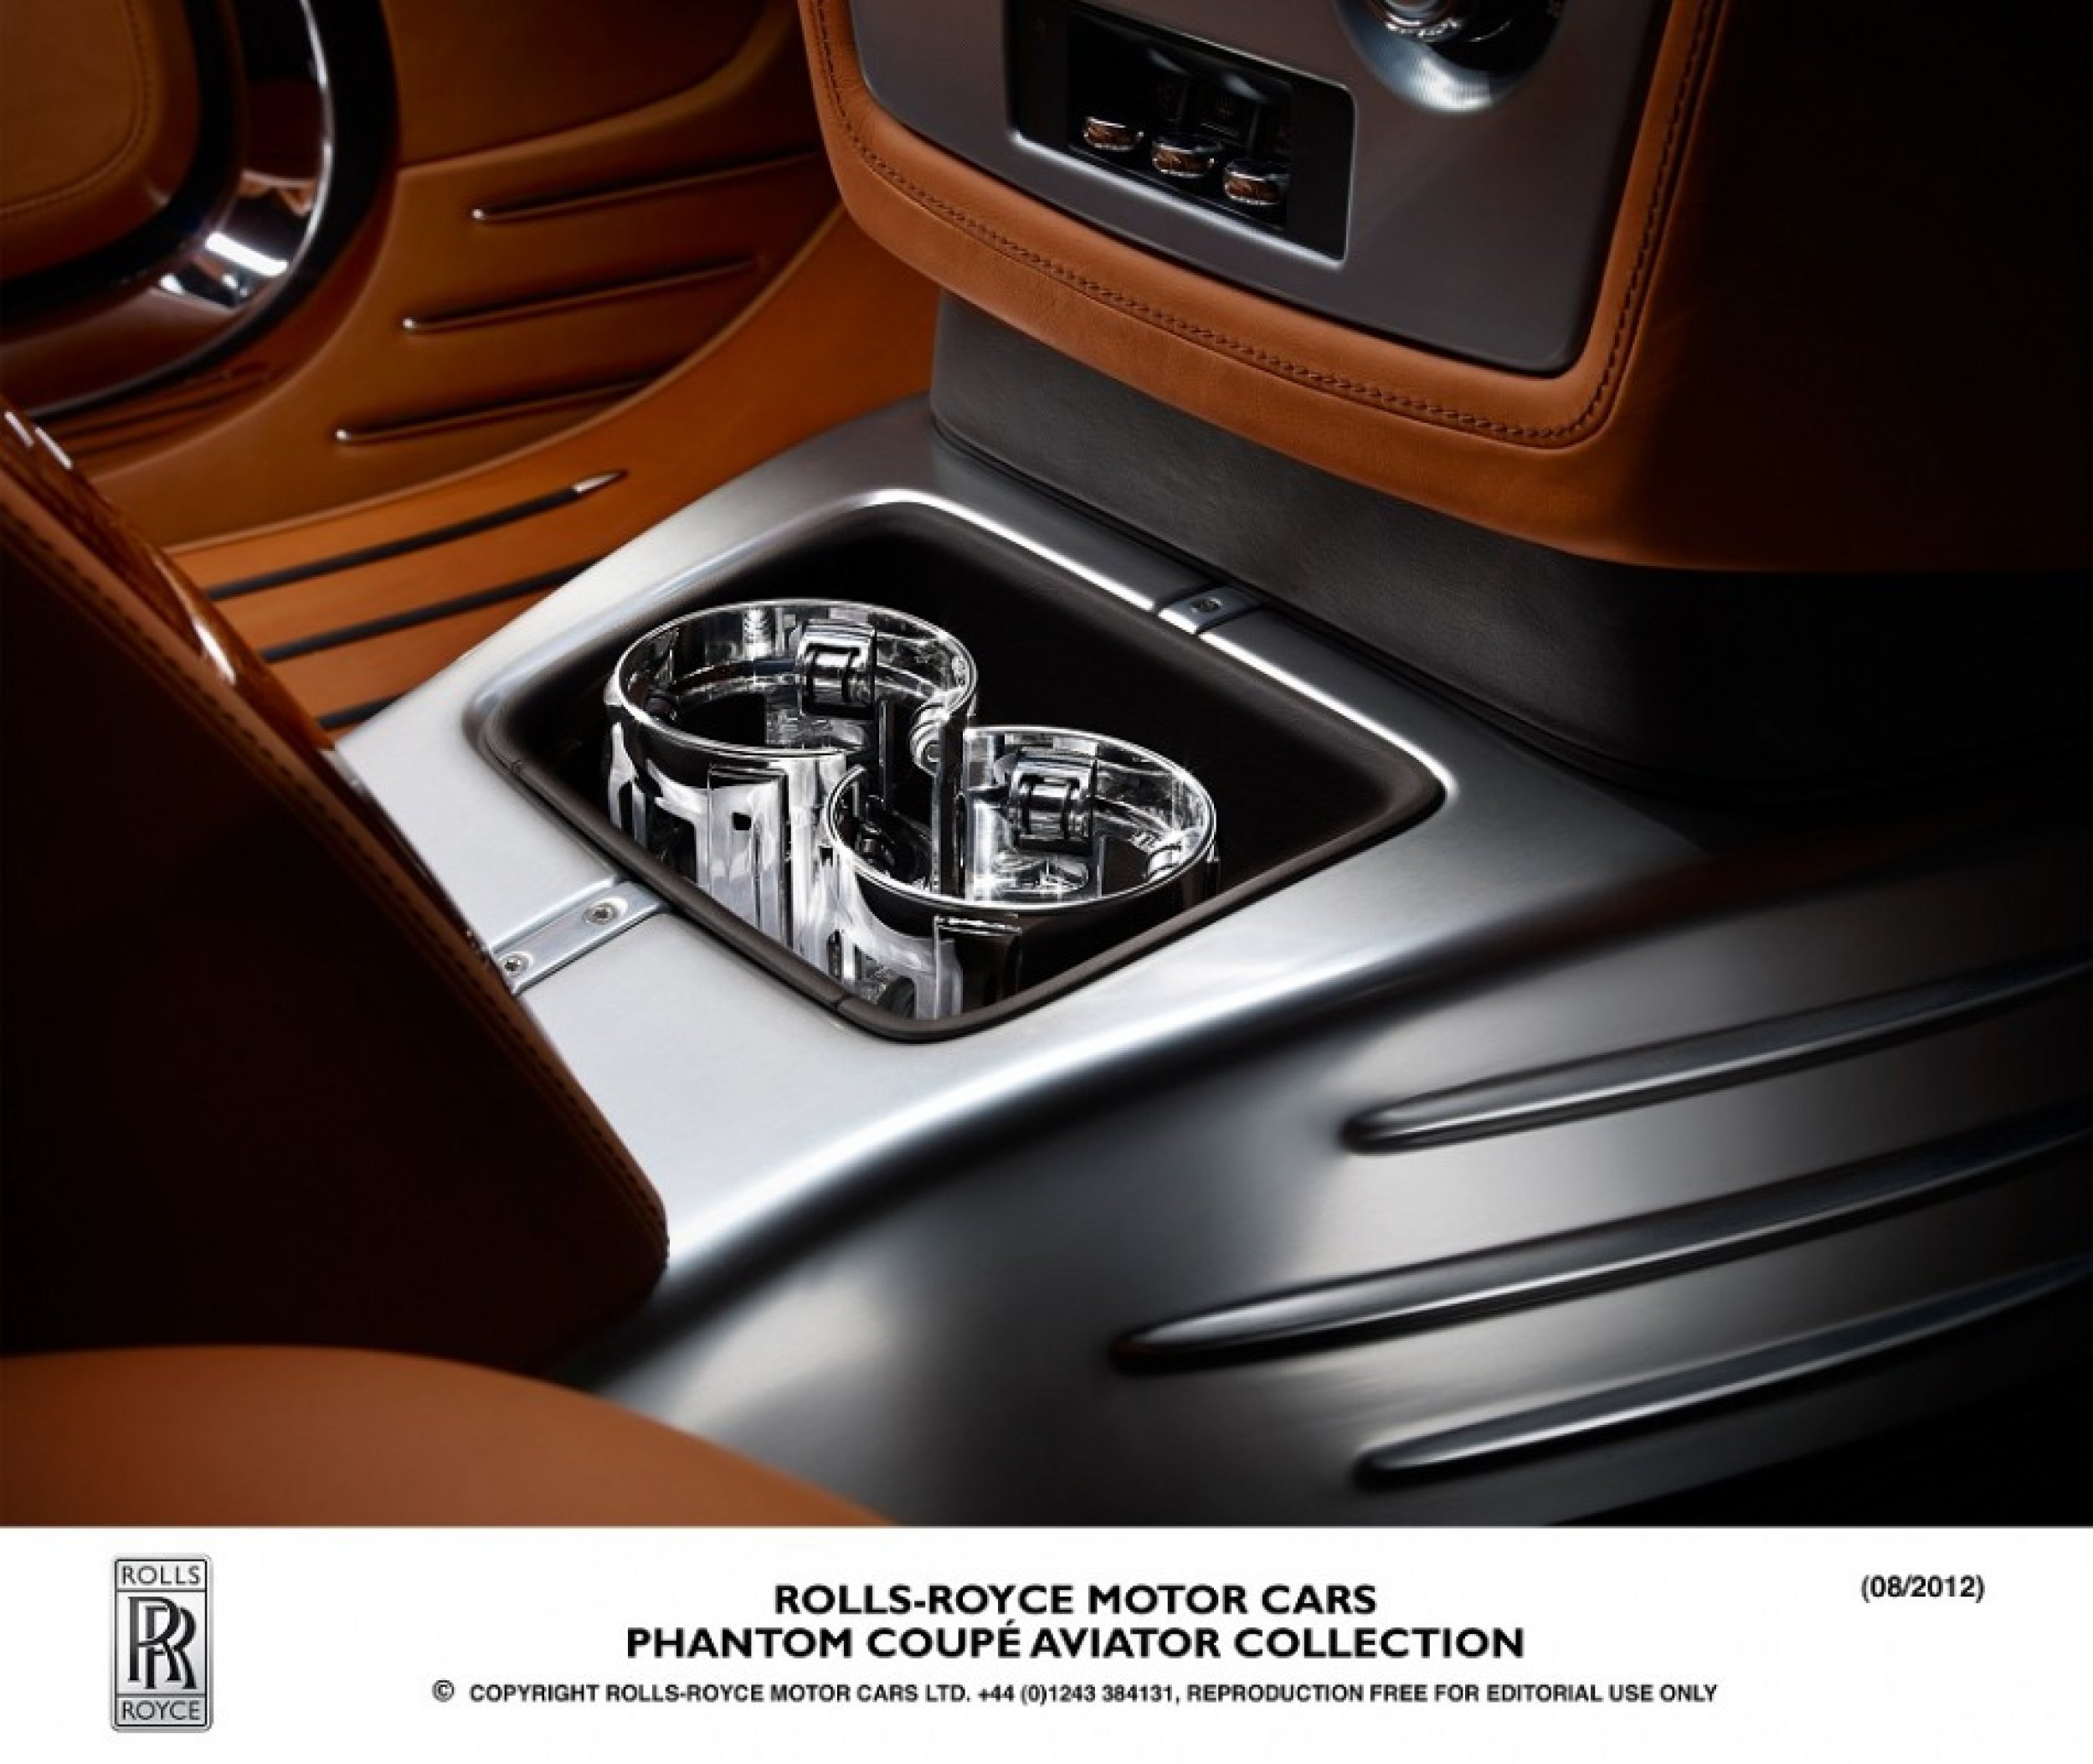 Close-up of interior details in the new Rolls-Royce Phantom Coupe Aviator.